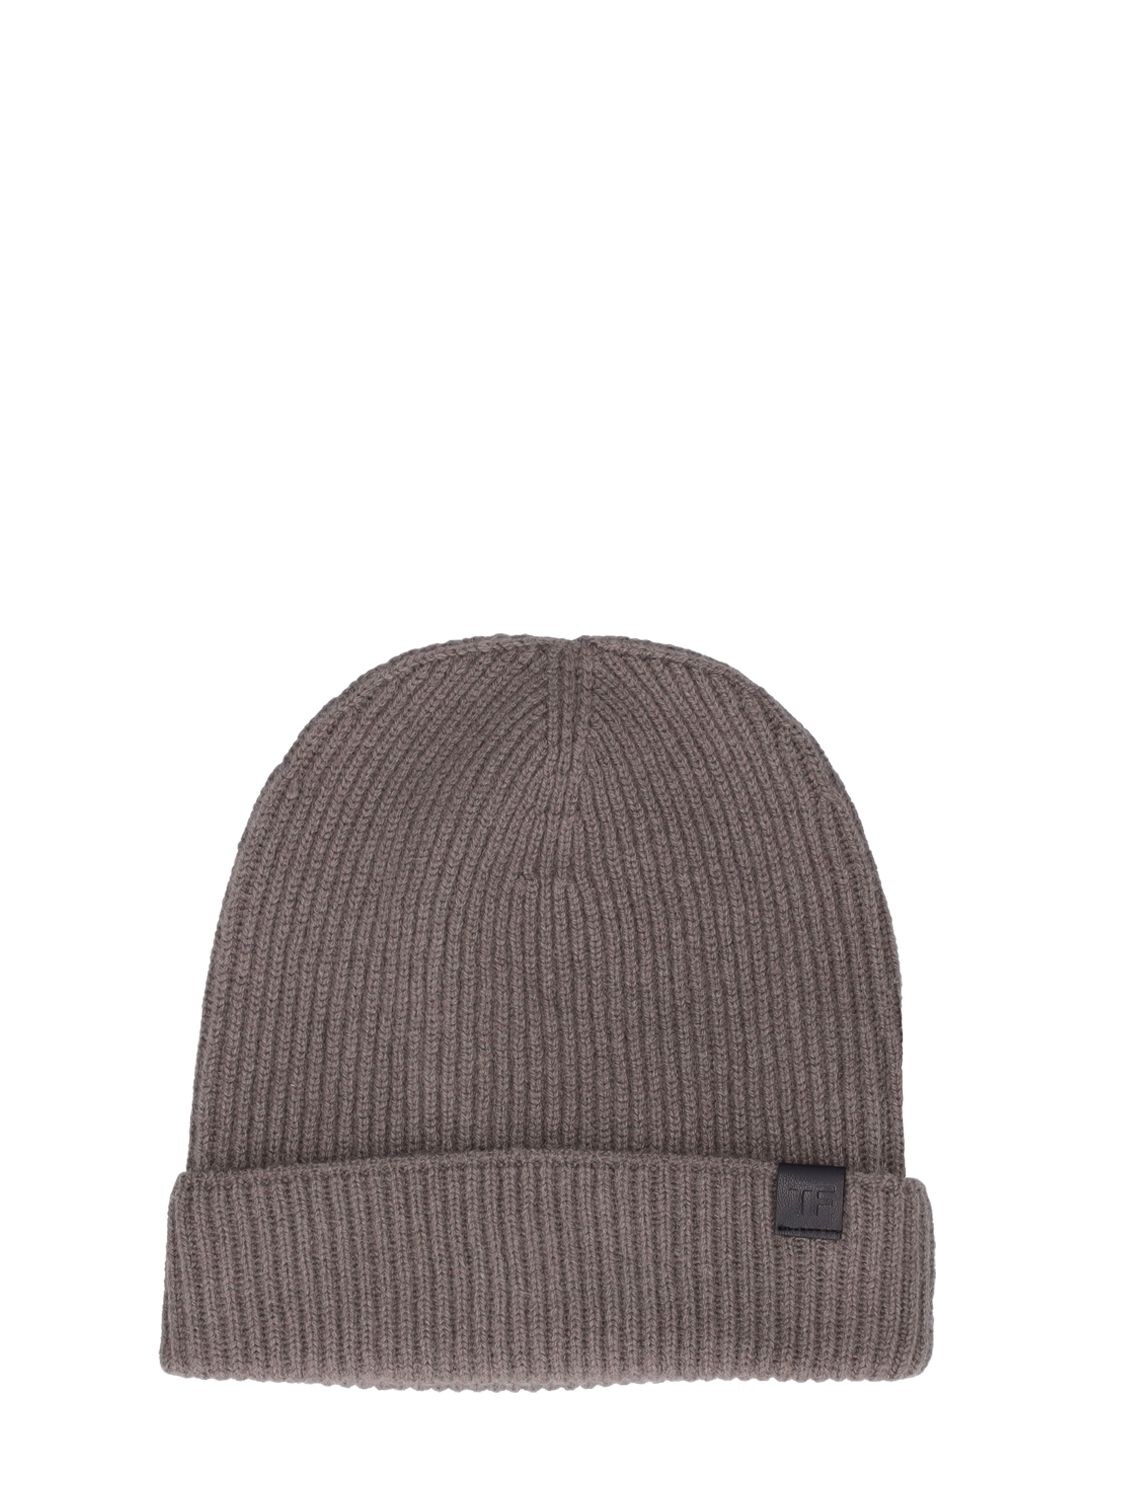 Tom Ford Cashmere Hat In Military Green